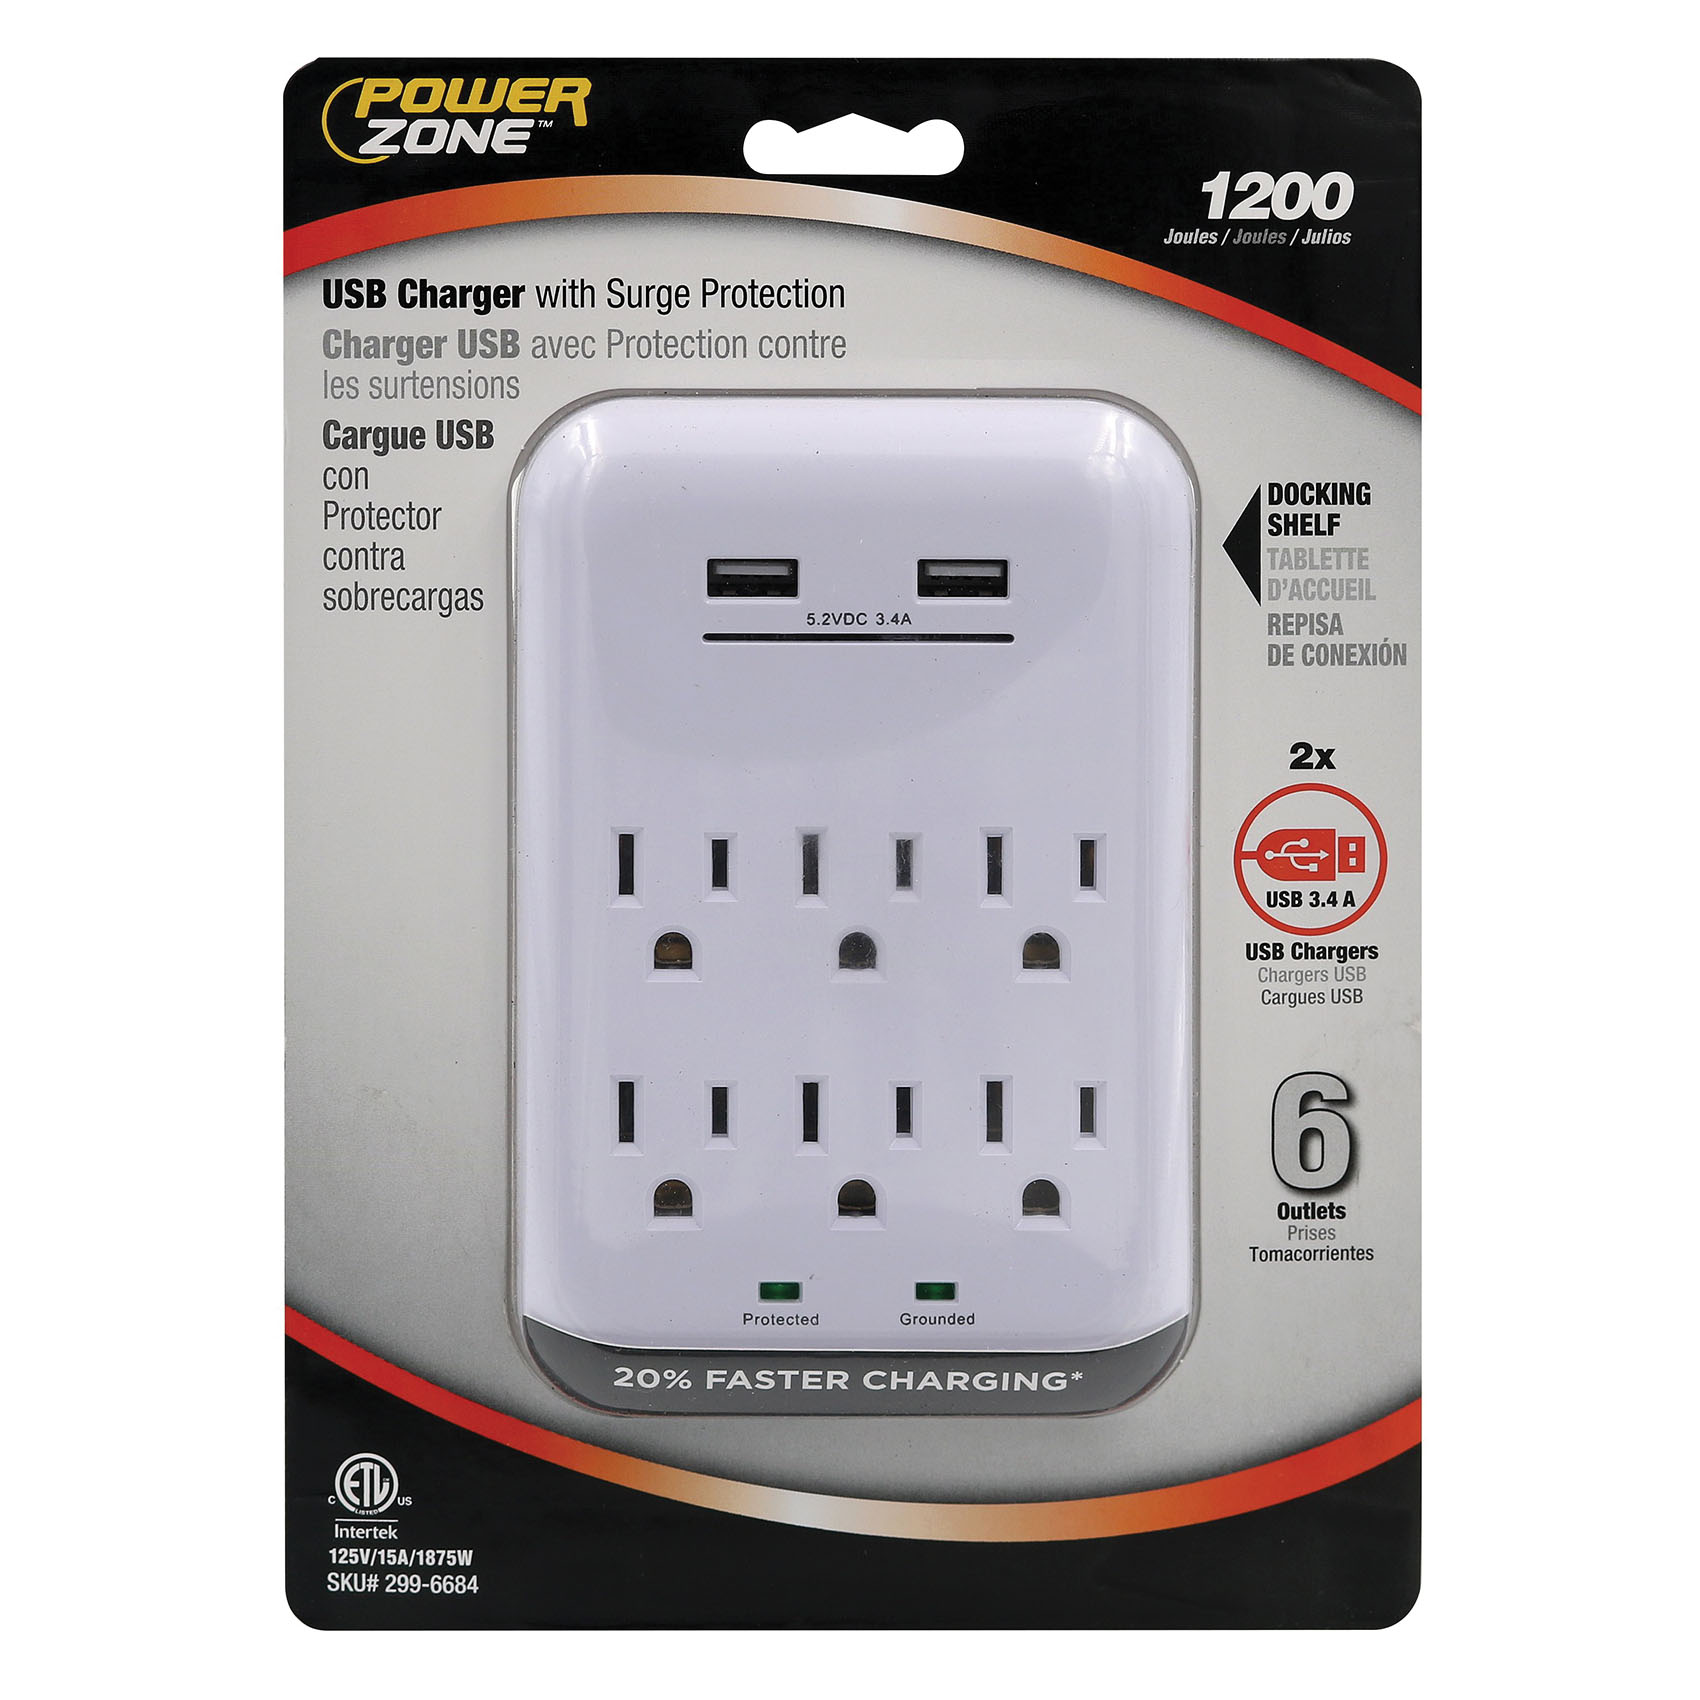 USB Charger with Surge Protection, 6-Outlets, 2 -Pole, 3.4 A